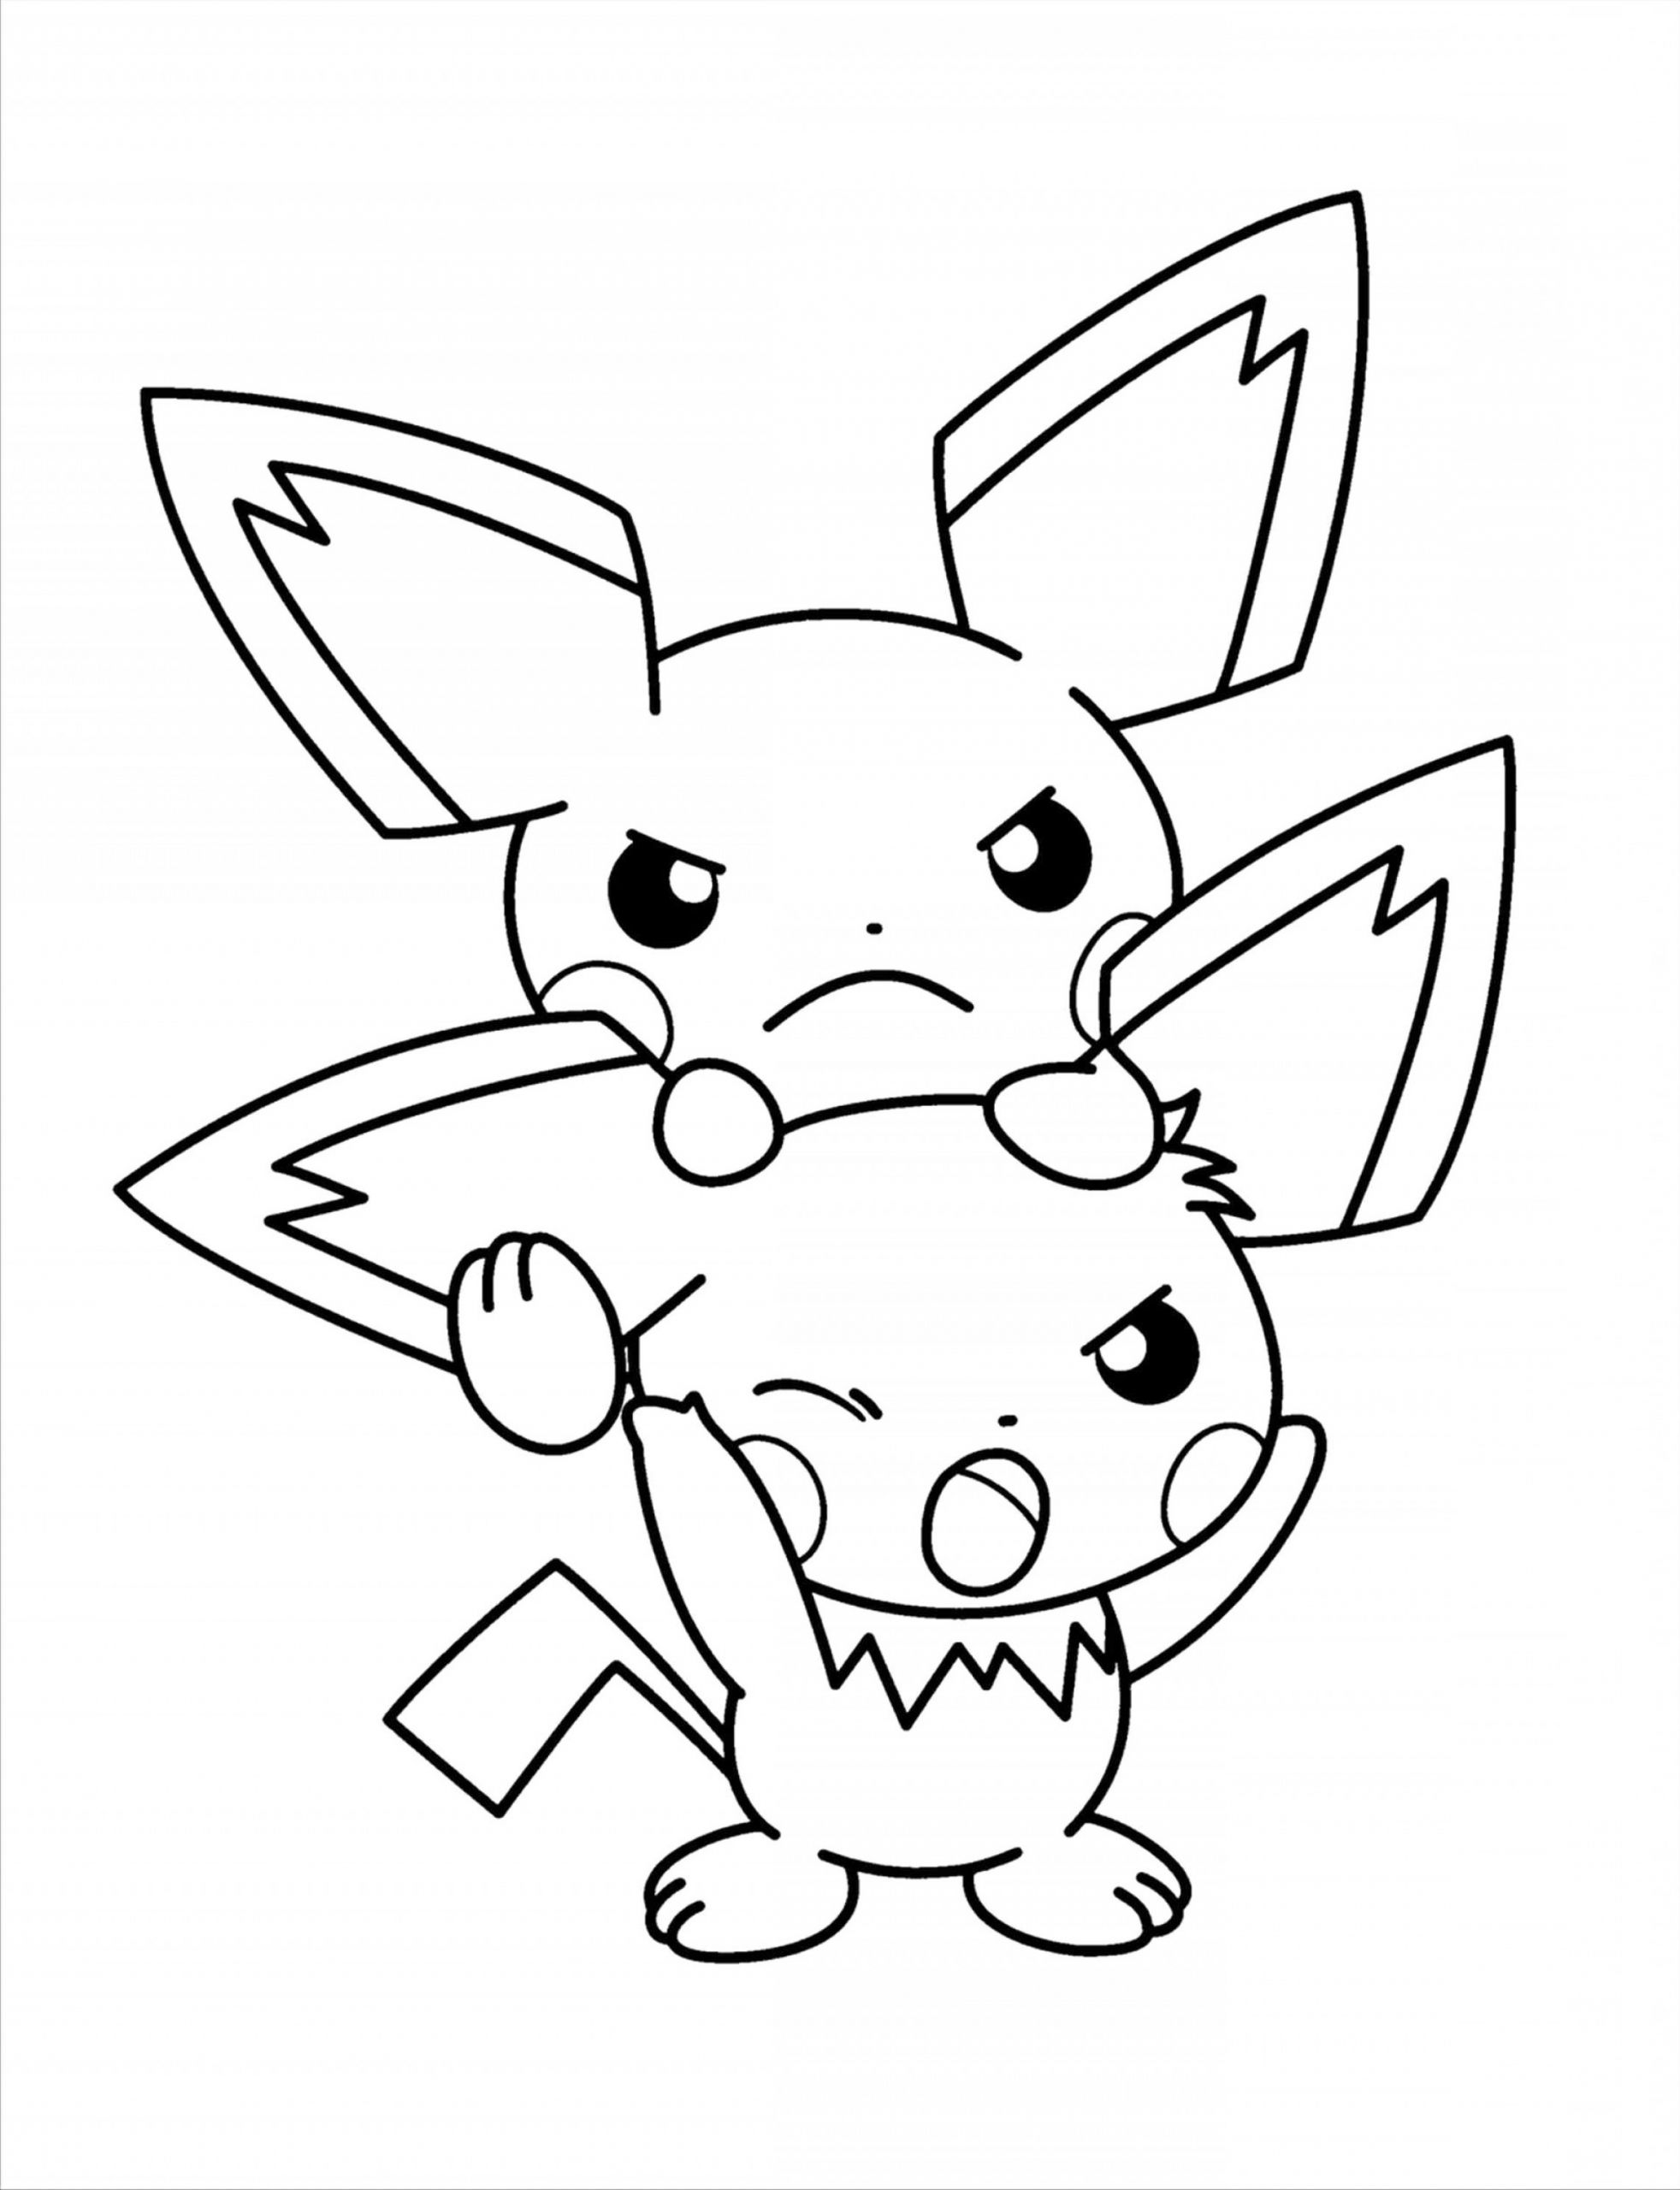 Baby Pikachu Coloring Pages
 Pikachu Vector Black And White